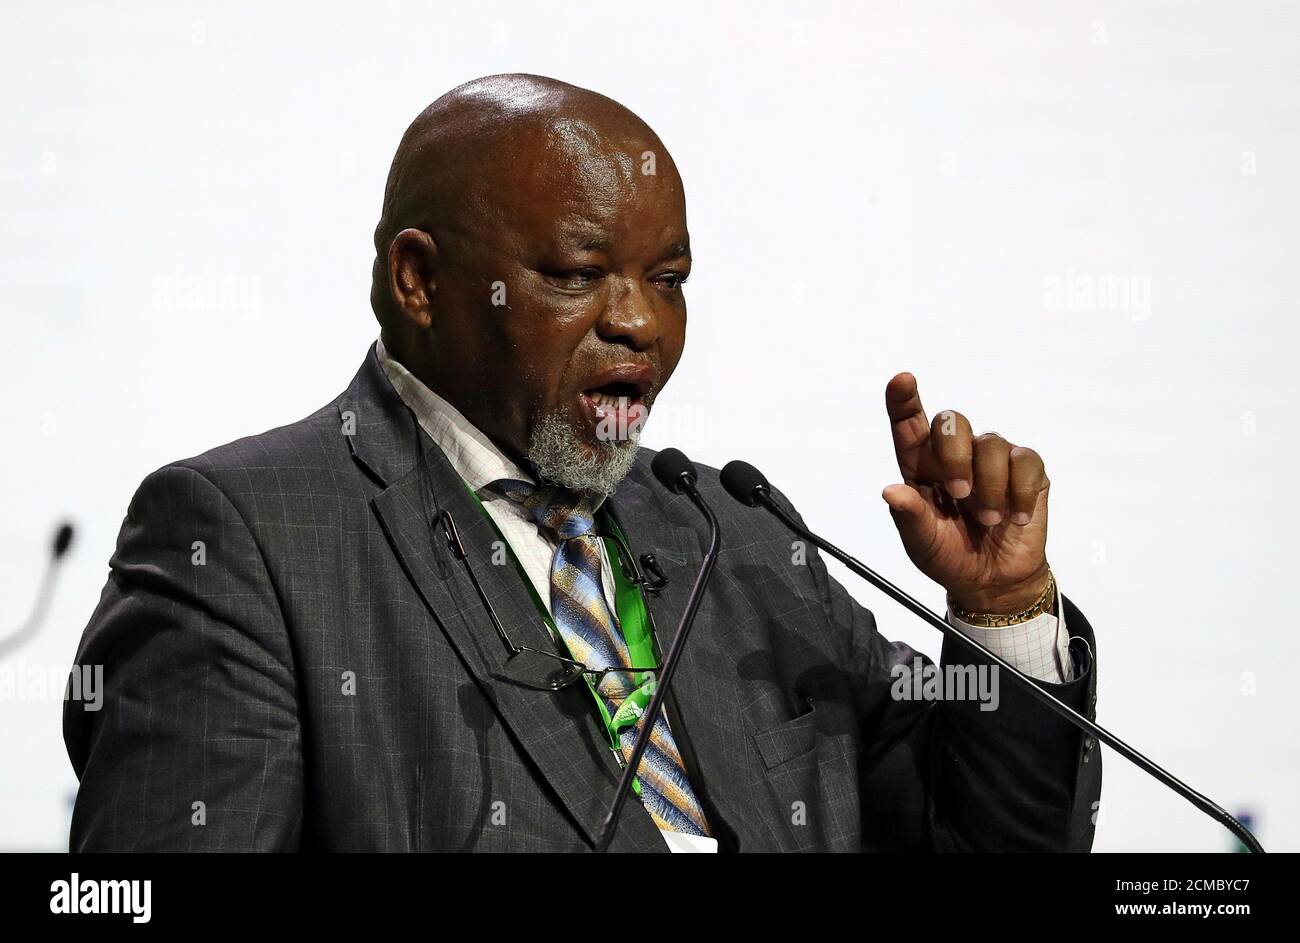 South Africa's Minister of Mineral Resources Gwede Mantashe opens the Investing in African Mining Indaba conference in Cape Town, South Africa February 4, 2019.  REUTERS/Mike Hutchings Stock Photo